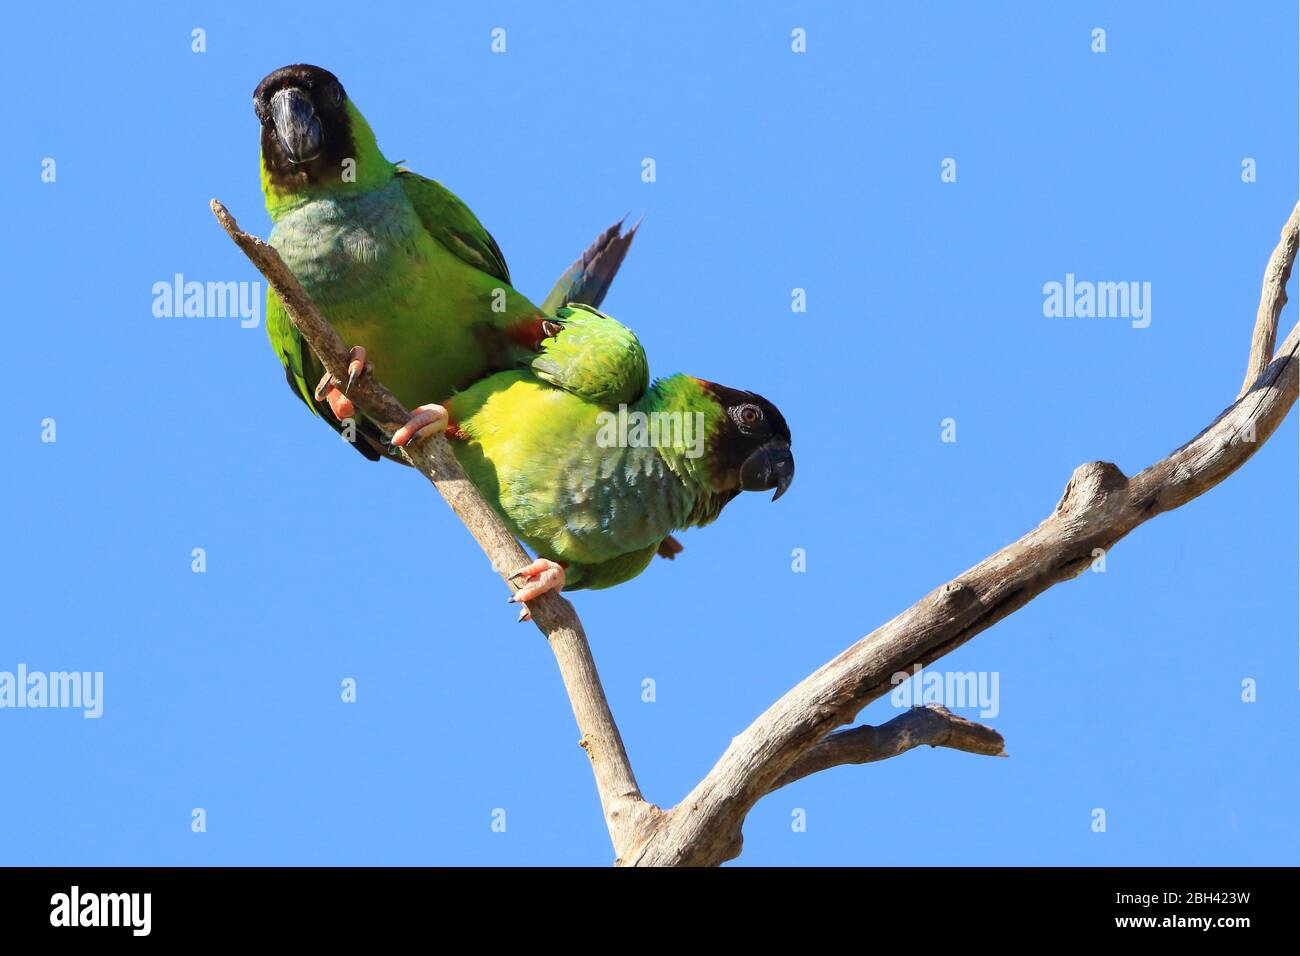 couple of Nanday Parakeet (Aratinga nenday) perched together on a branch. Bonito, Mato Grosso do Sul, Brazil Stock Photo